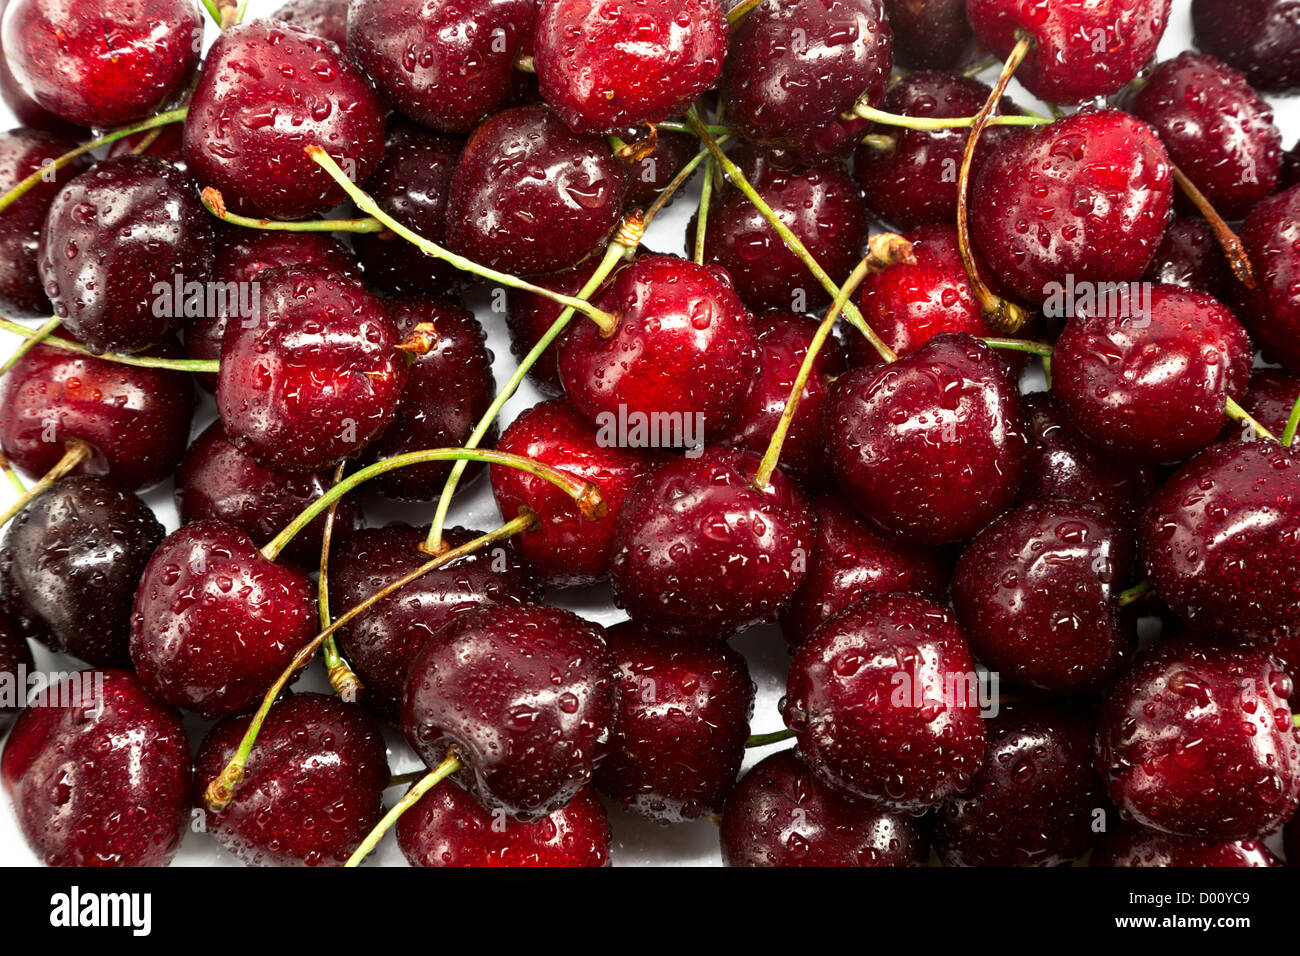 Ripe red cherries covered with water droplets Stock Photo